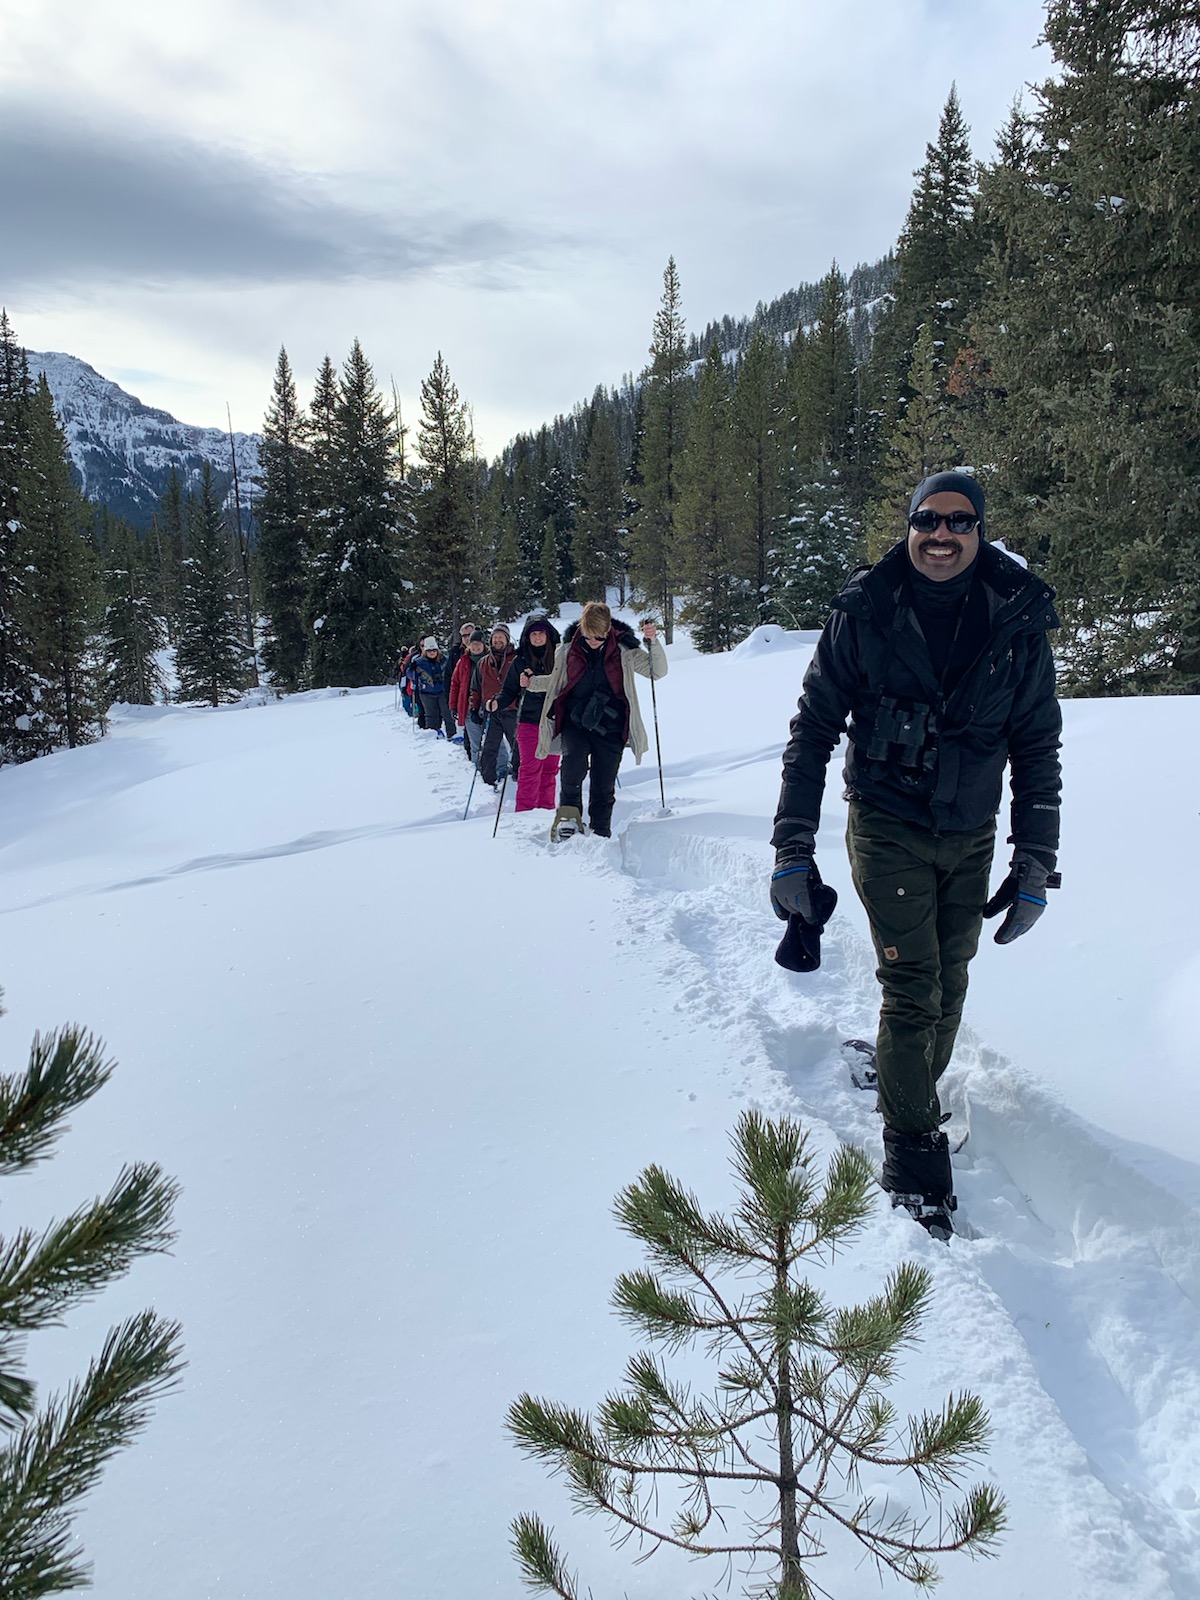 Snowshoeing with the group